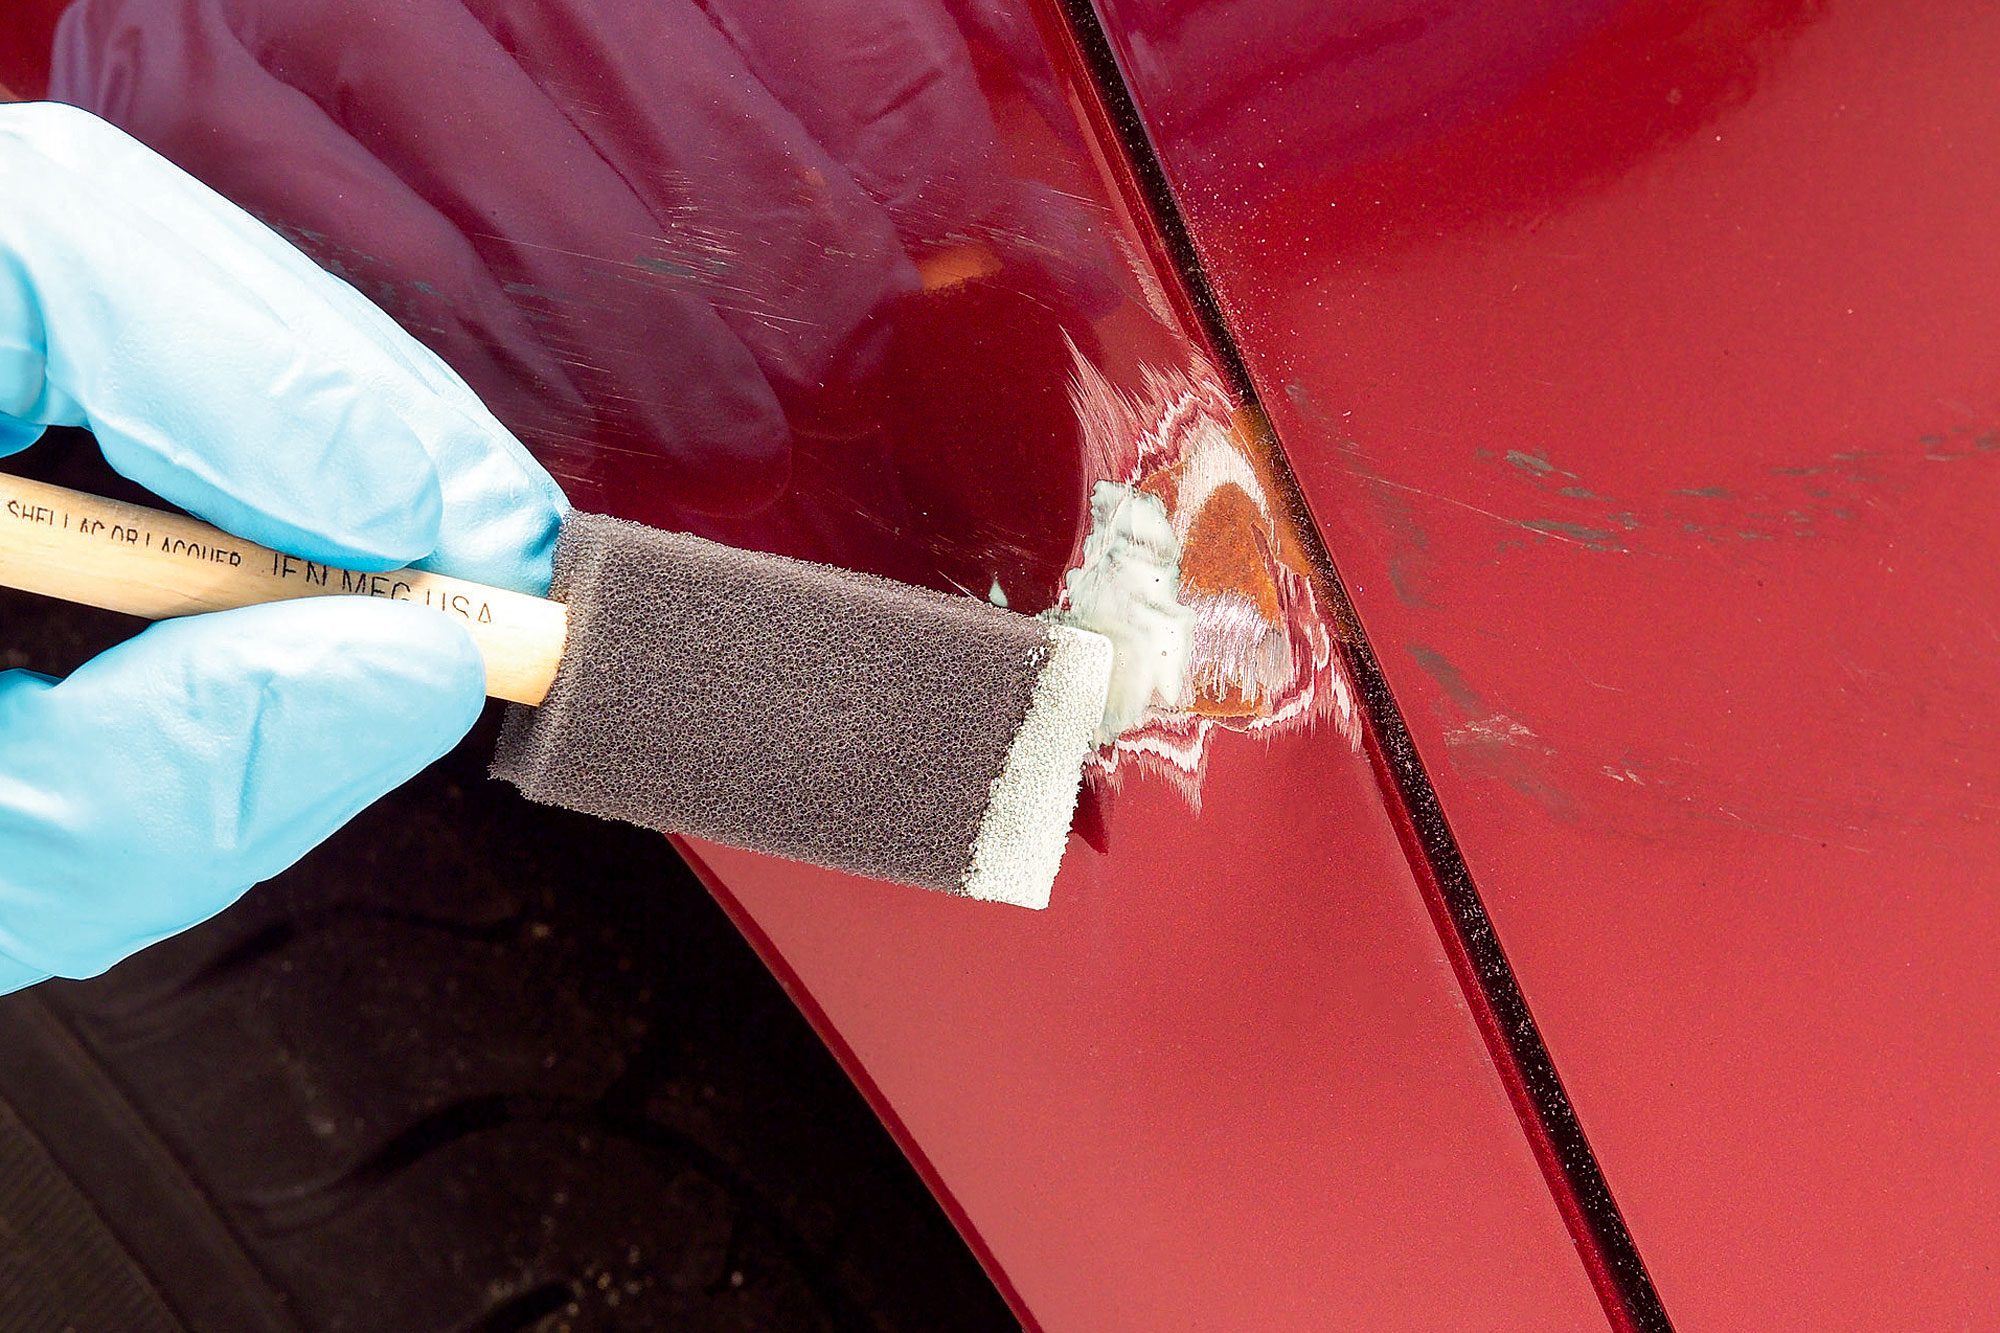 Touch Up Paint Codes: How to Find the Right Color for Your Car